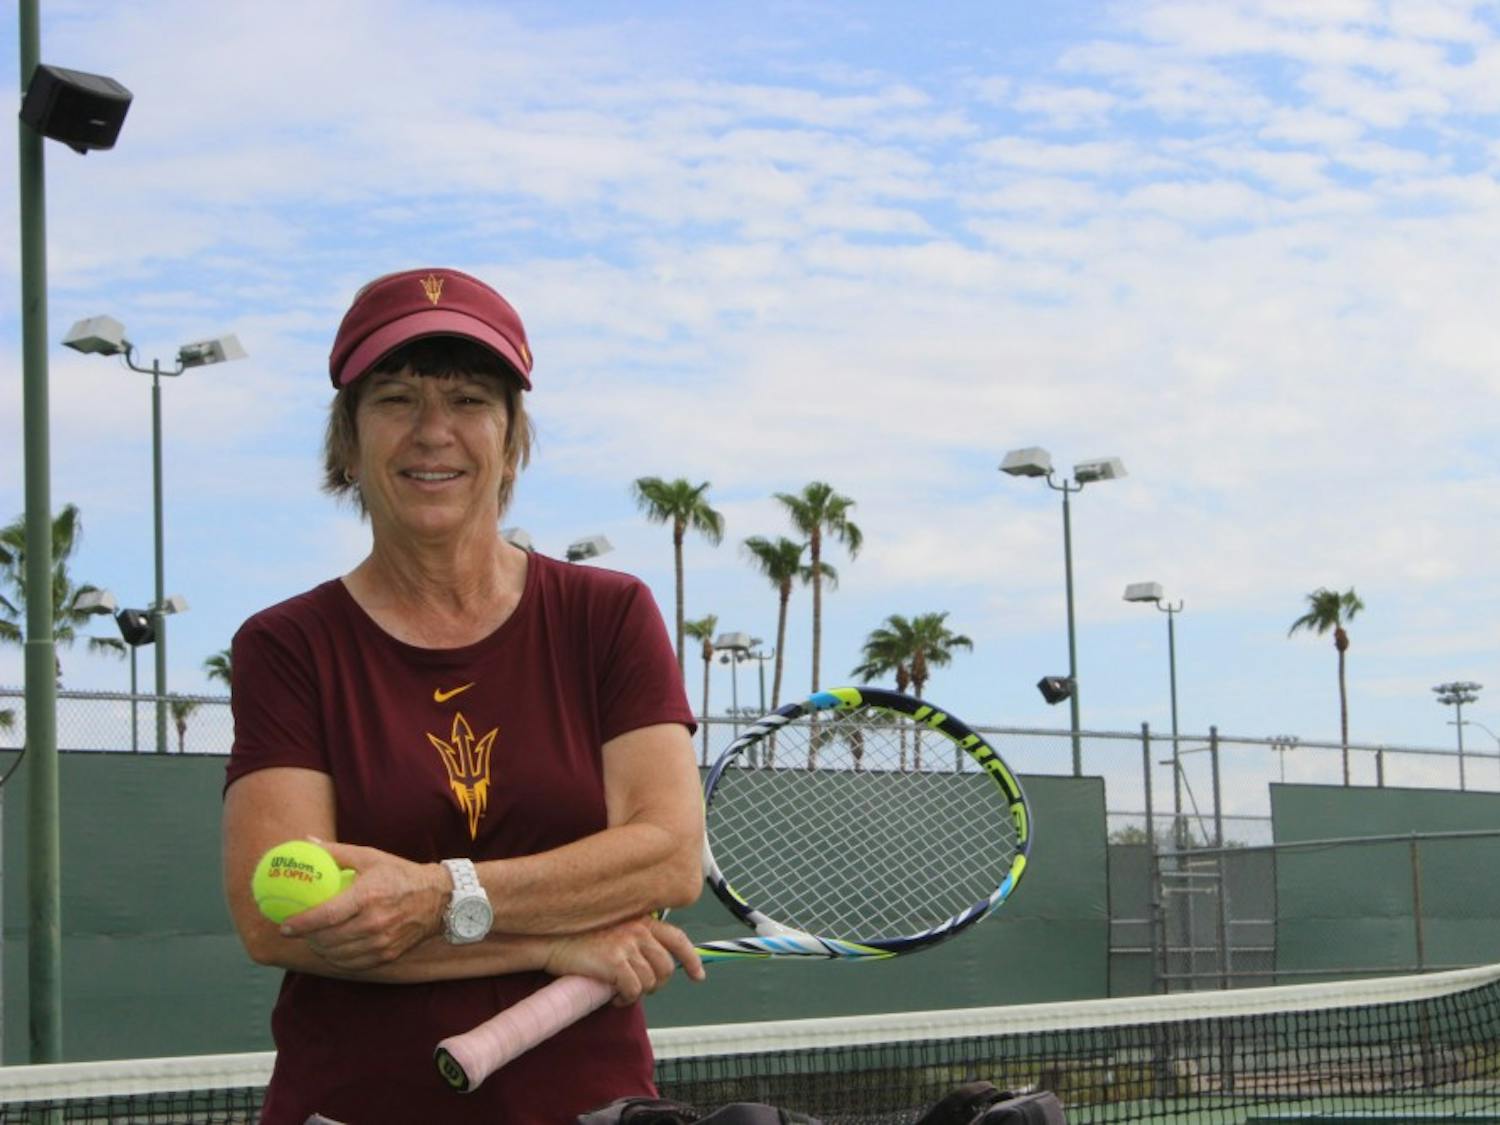 ASU tennis coach Sheila McInerney is pictured at the Whiteman Tennis Center in Tempe. (Photo by Evan Webeck)